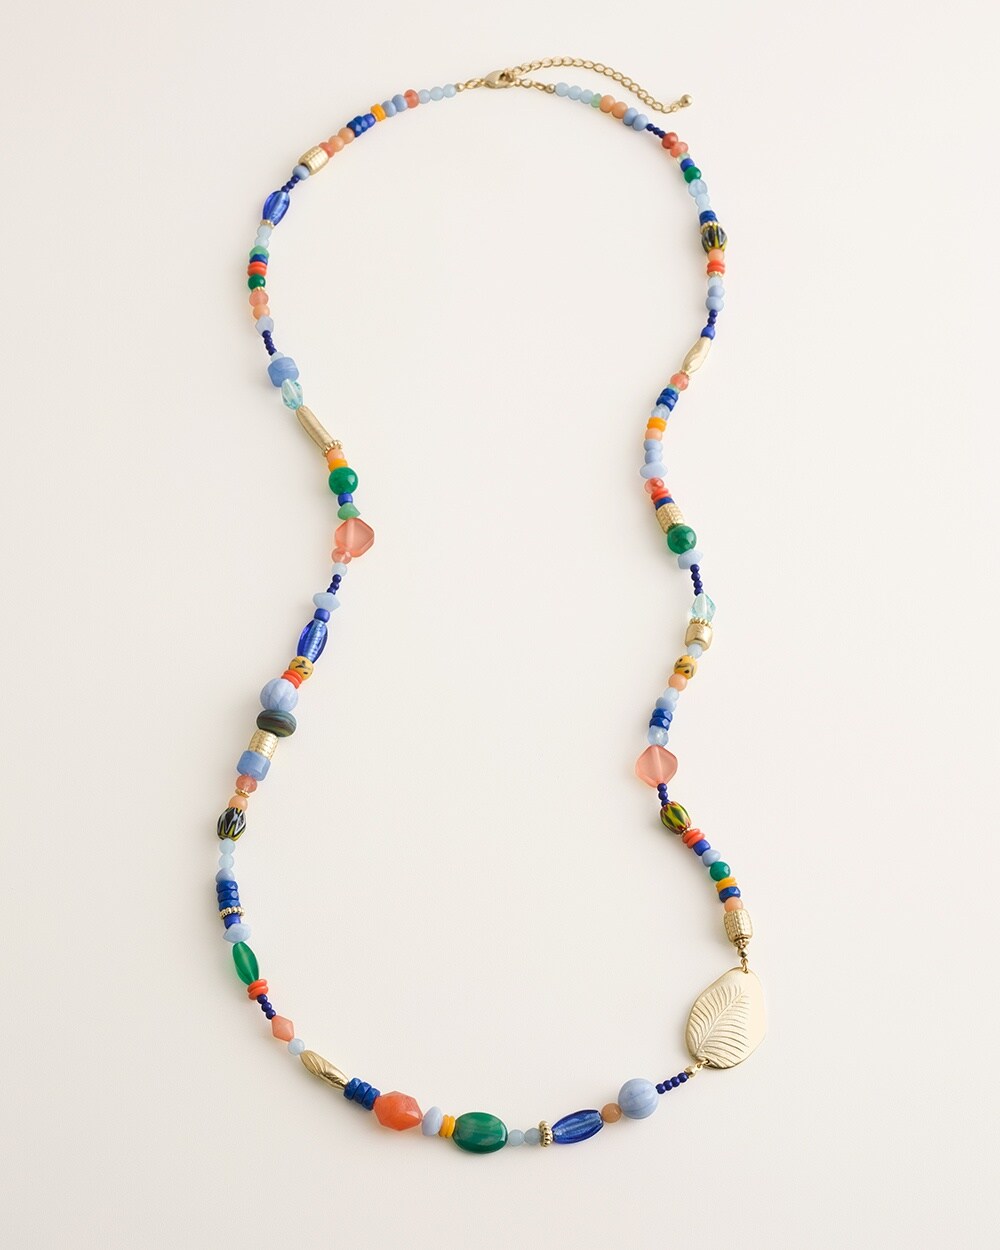 Beaded Multi-Colored Single-Strand Necklace